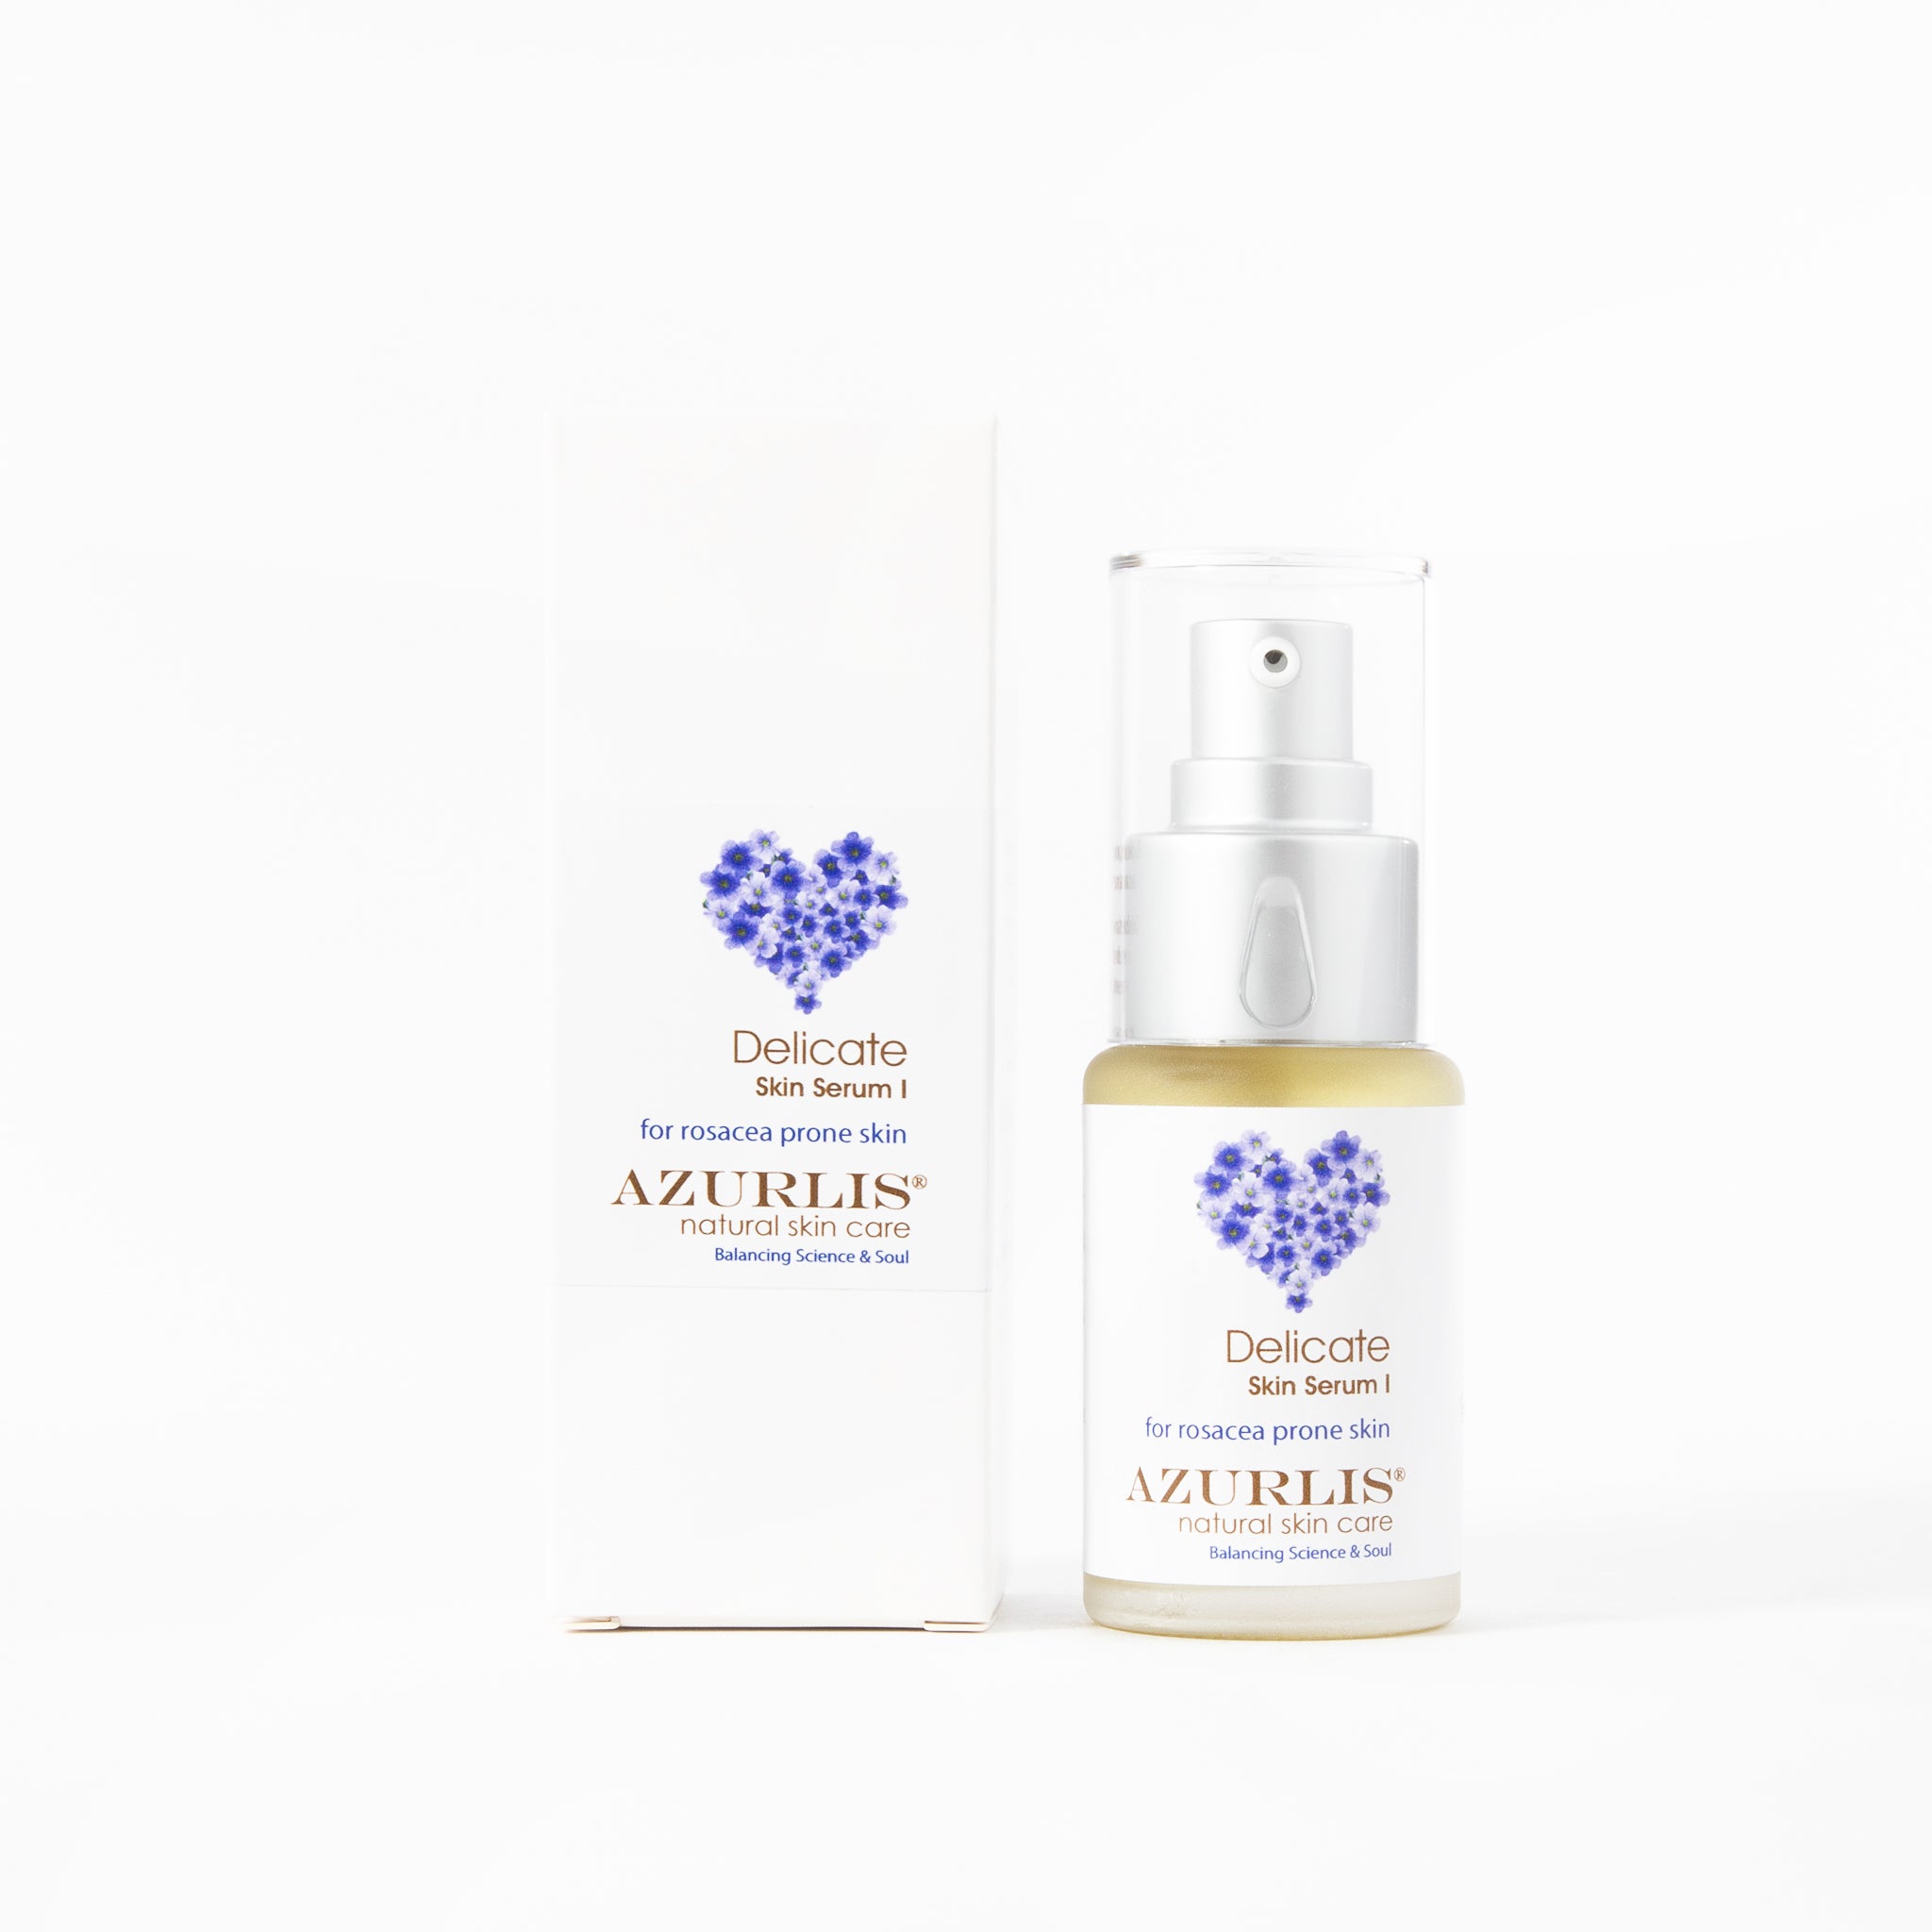 Azurlis™ Delicate Skin Serum I 30ml is a gentle nourishing serum that helps to calm and sooth sensitive skin including rosacea-prone skin.